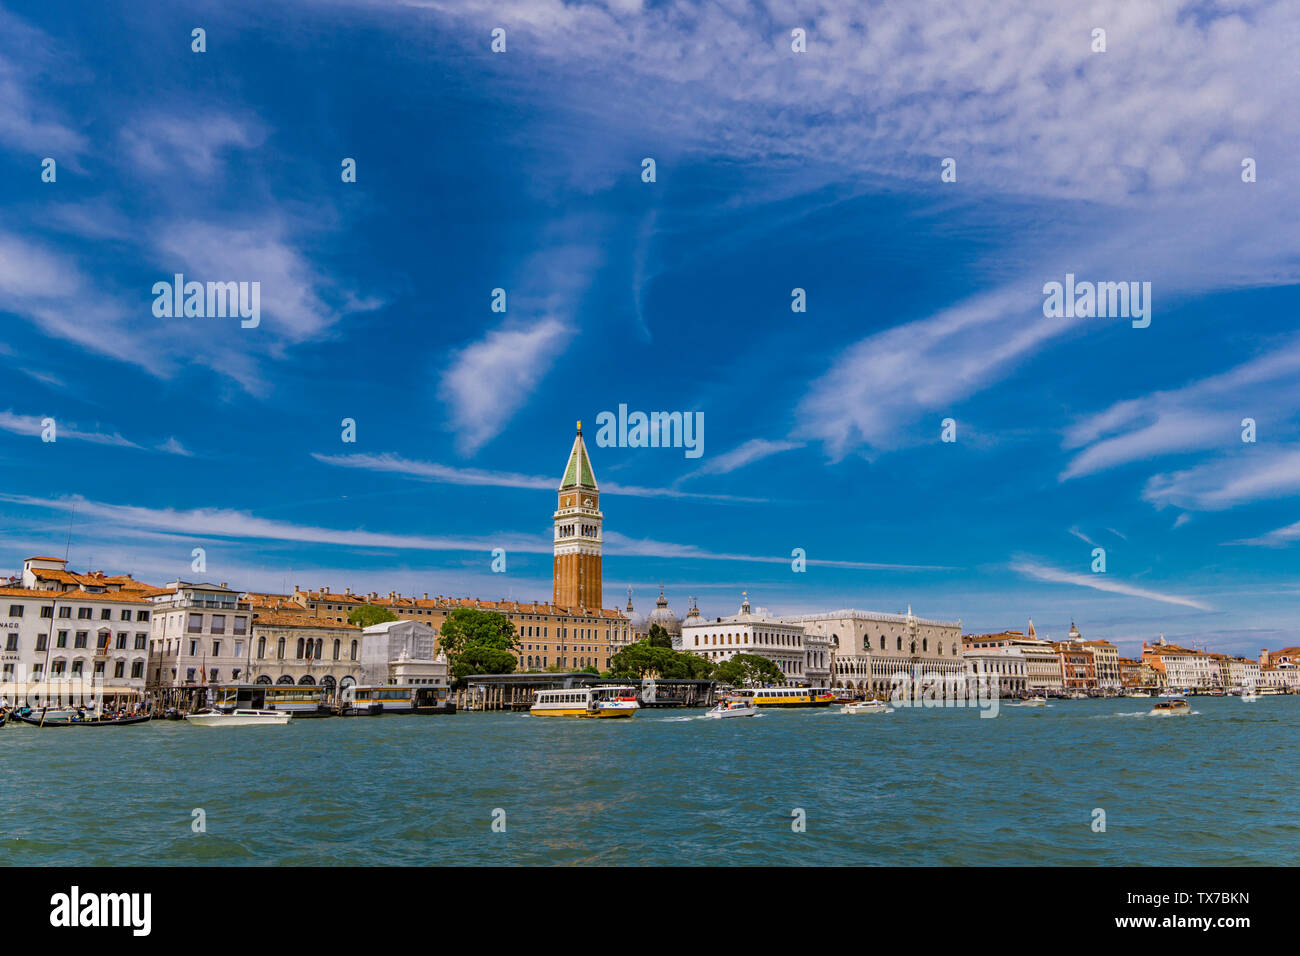 View at Venice, Italy. It is estimated that 25 million tourists visit Venice each year. Stock Photo